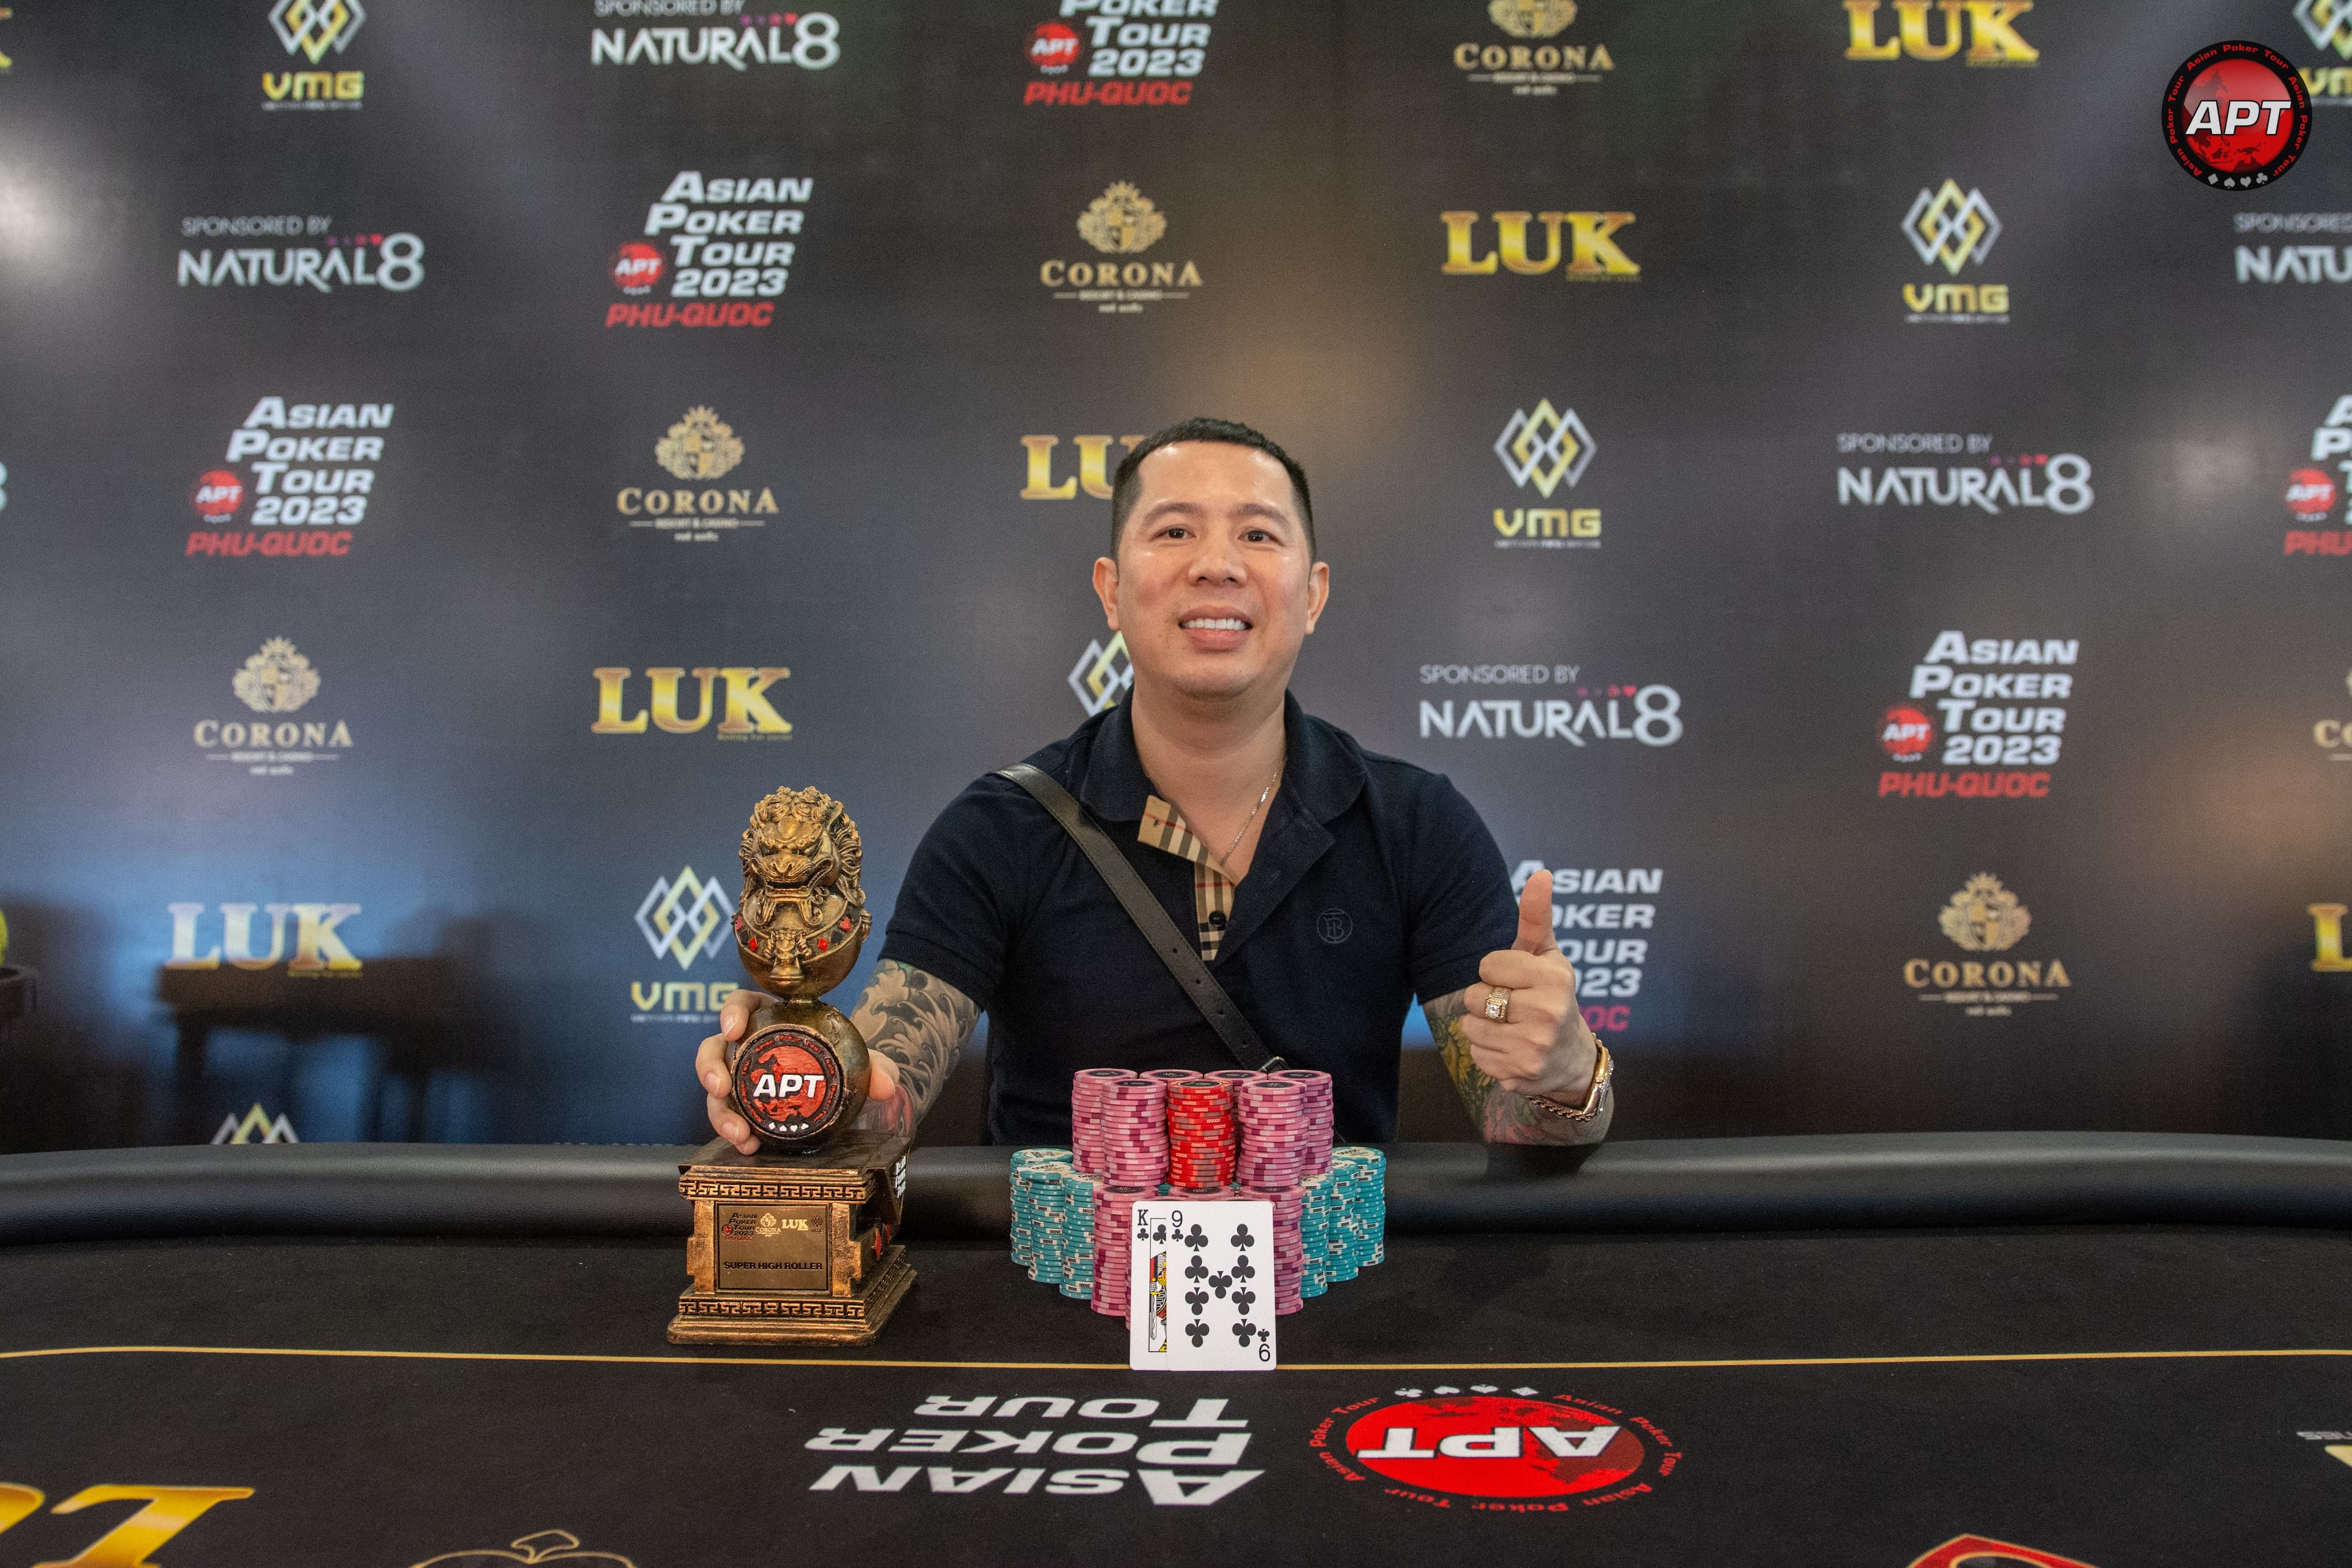 Vietnam's Nguyen Trung Quan Wins Record-Breaking Super High Roller For ₫1.196BN (~$51.45K), Kaito Hirai Crowned Mystery Bounty Hunter Champion For ₫261.96M (~$11.26K)